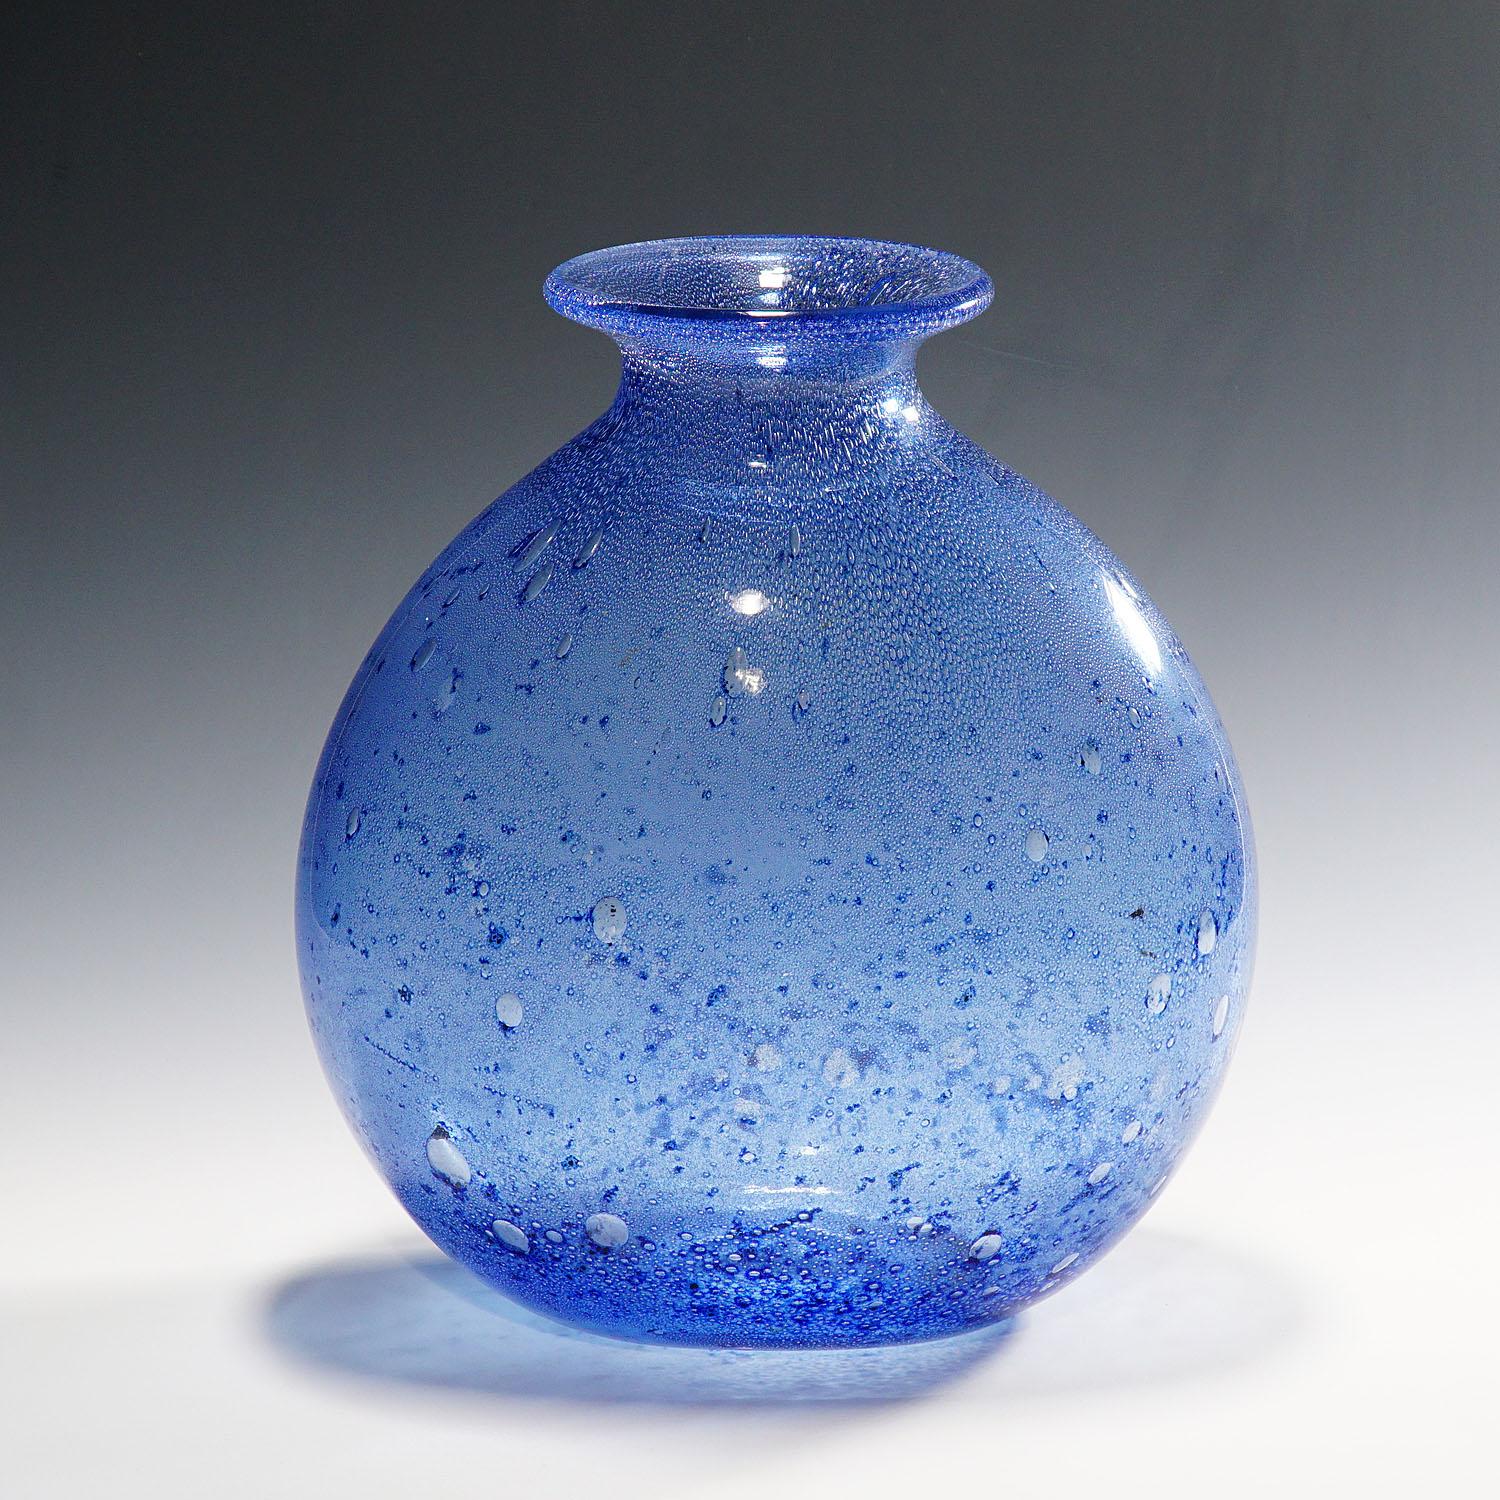 A large blue art glass vase from the 'Efeso' series designed by Ercole Barovier in 1964 for Barovier & Toso, Murano, Italy. Thick glass in bright blue with irregular air inclusions. A very rare example of the famous designs of Ercole Barovier.